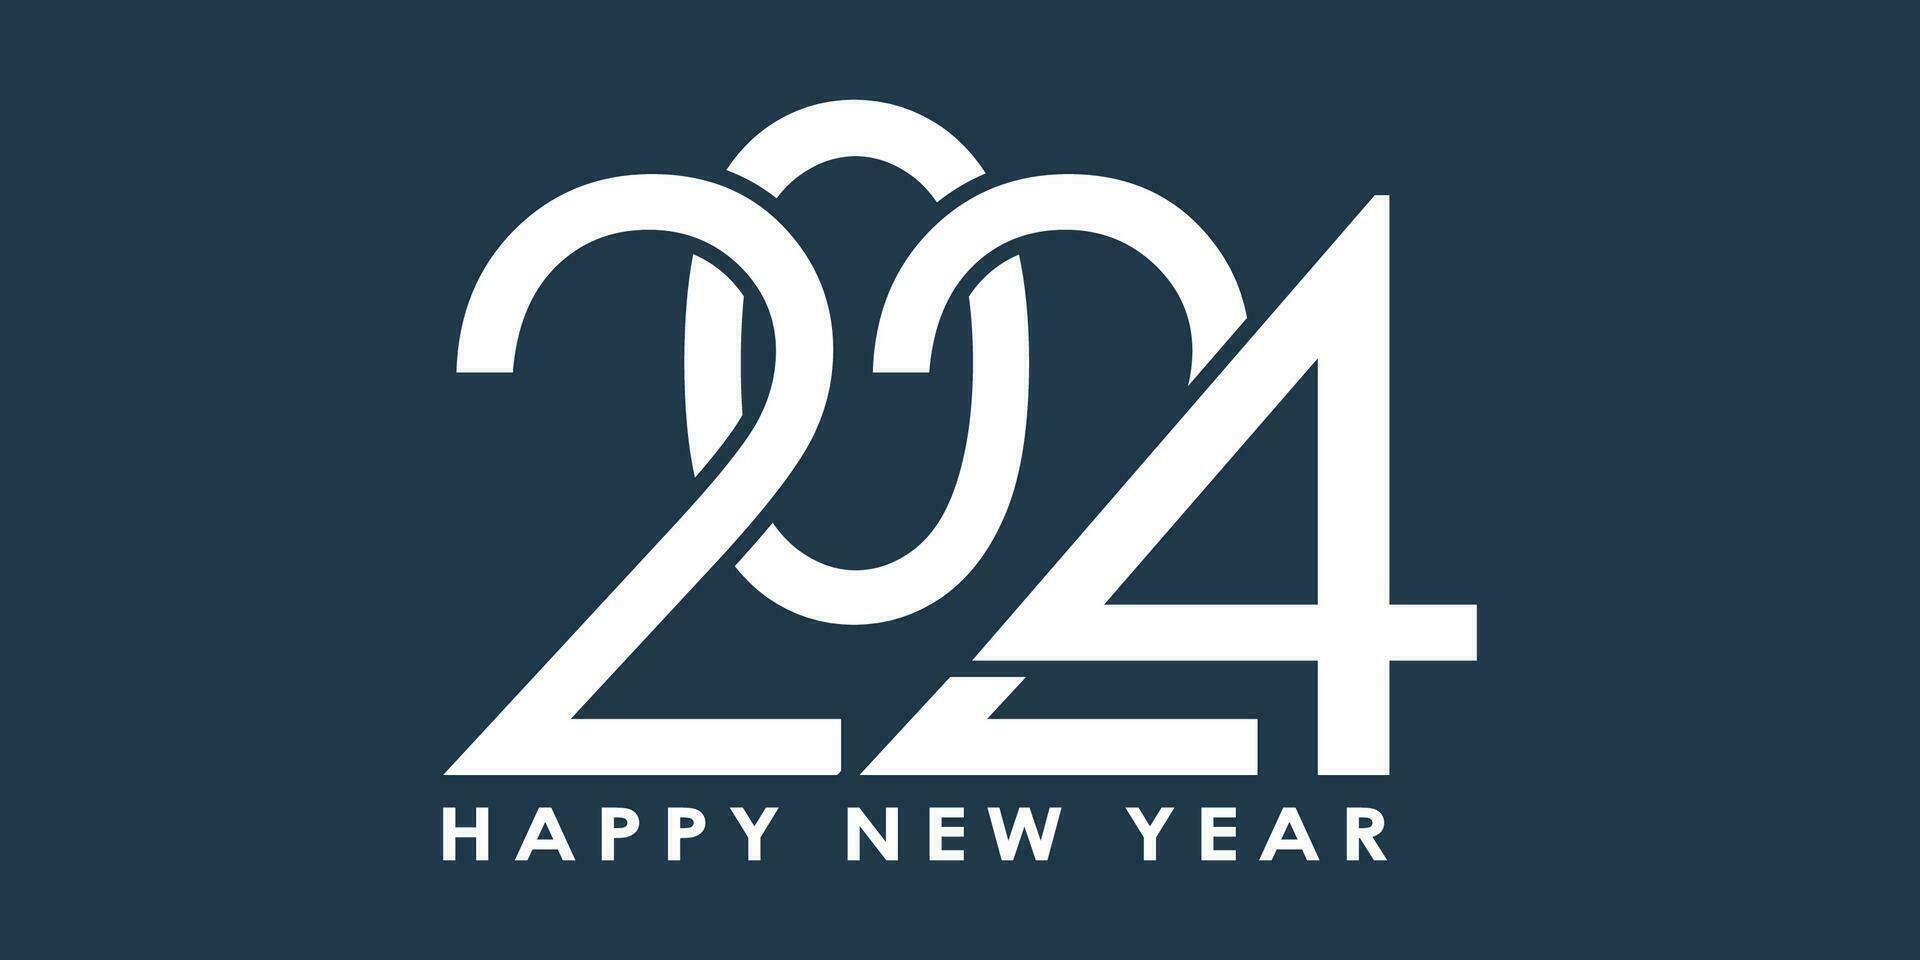 Happy New Year banner design with white numbers vector